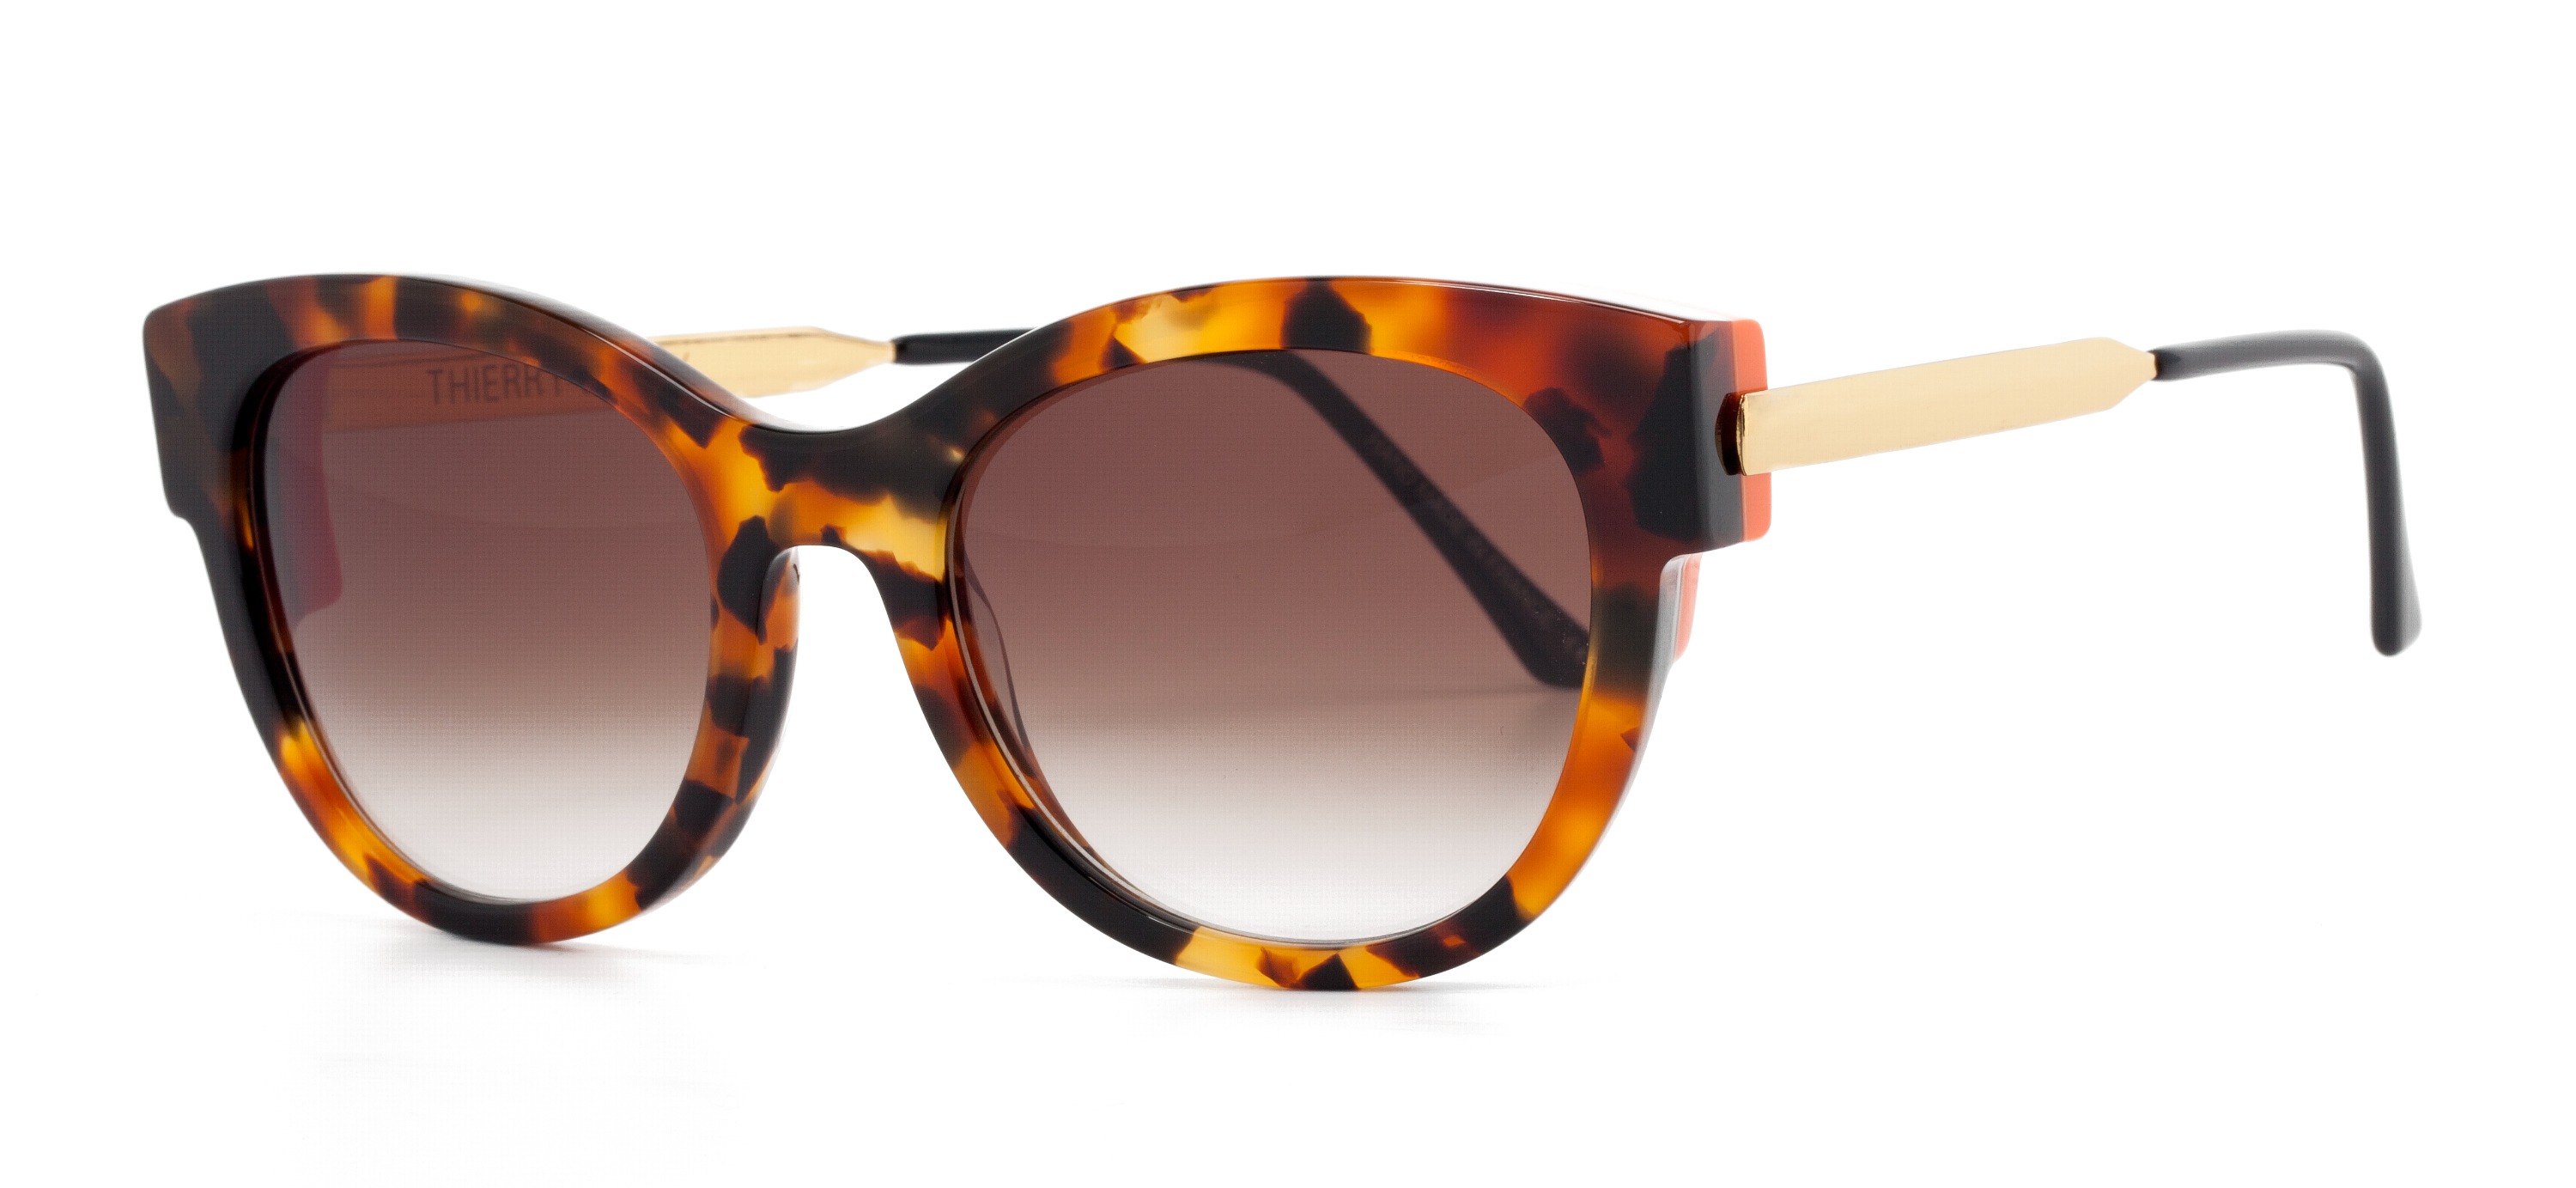 ANGELY 252 | Thierry Lasry